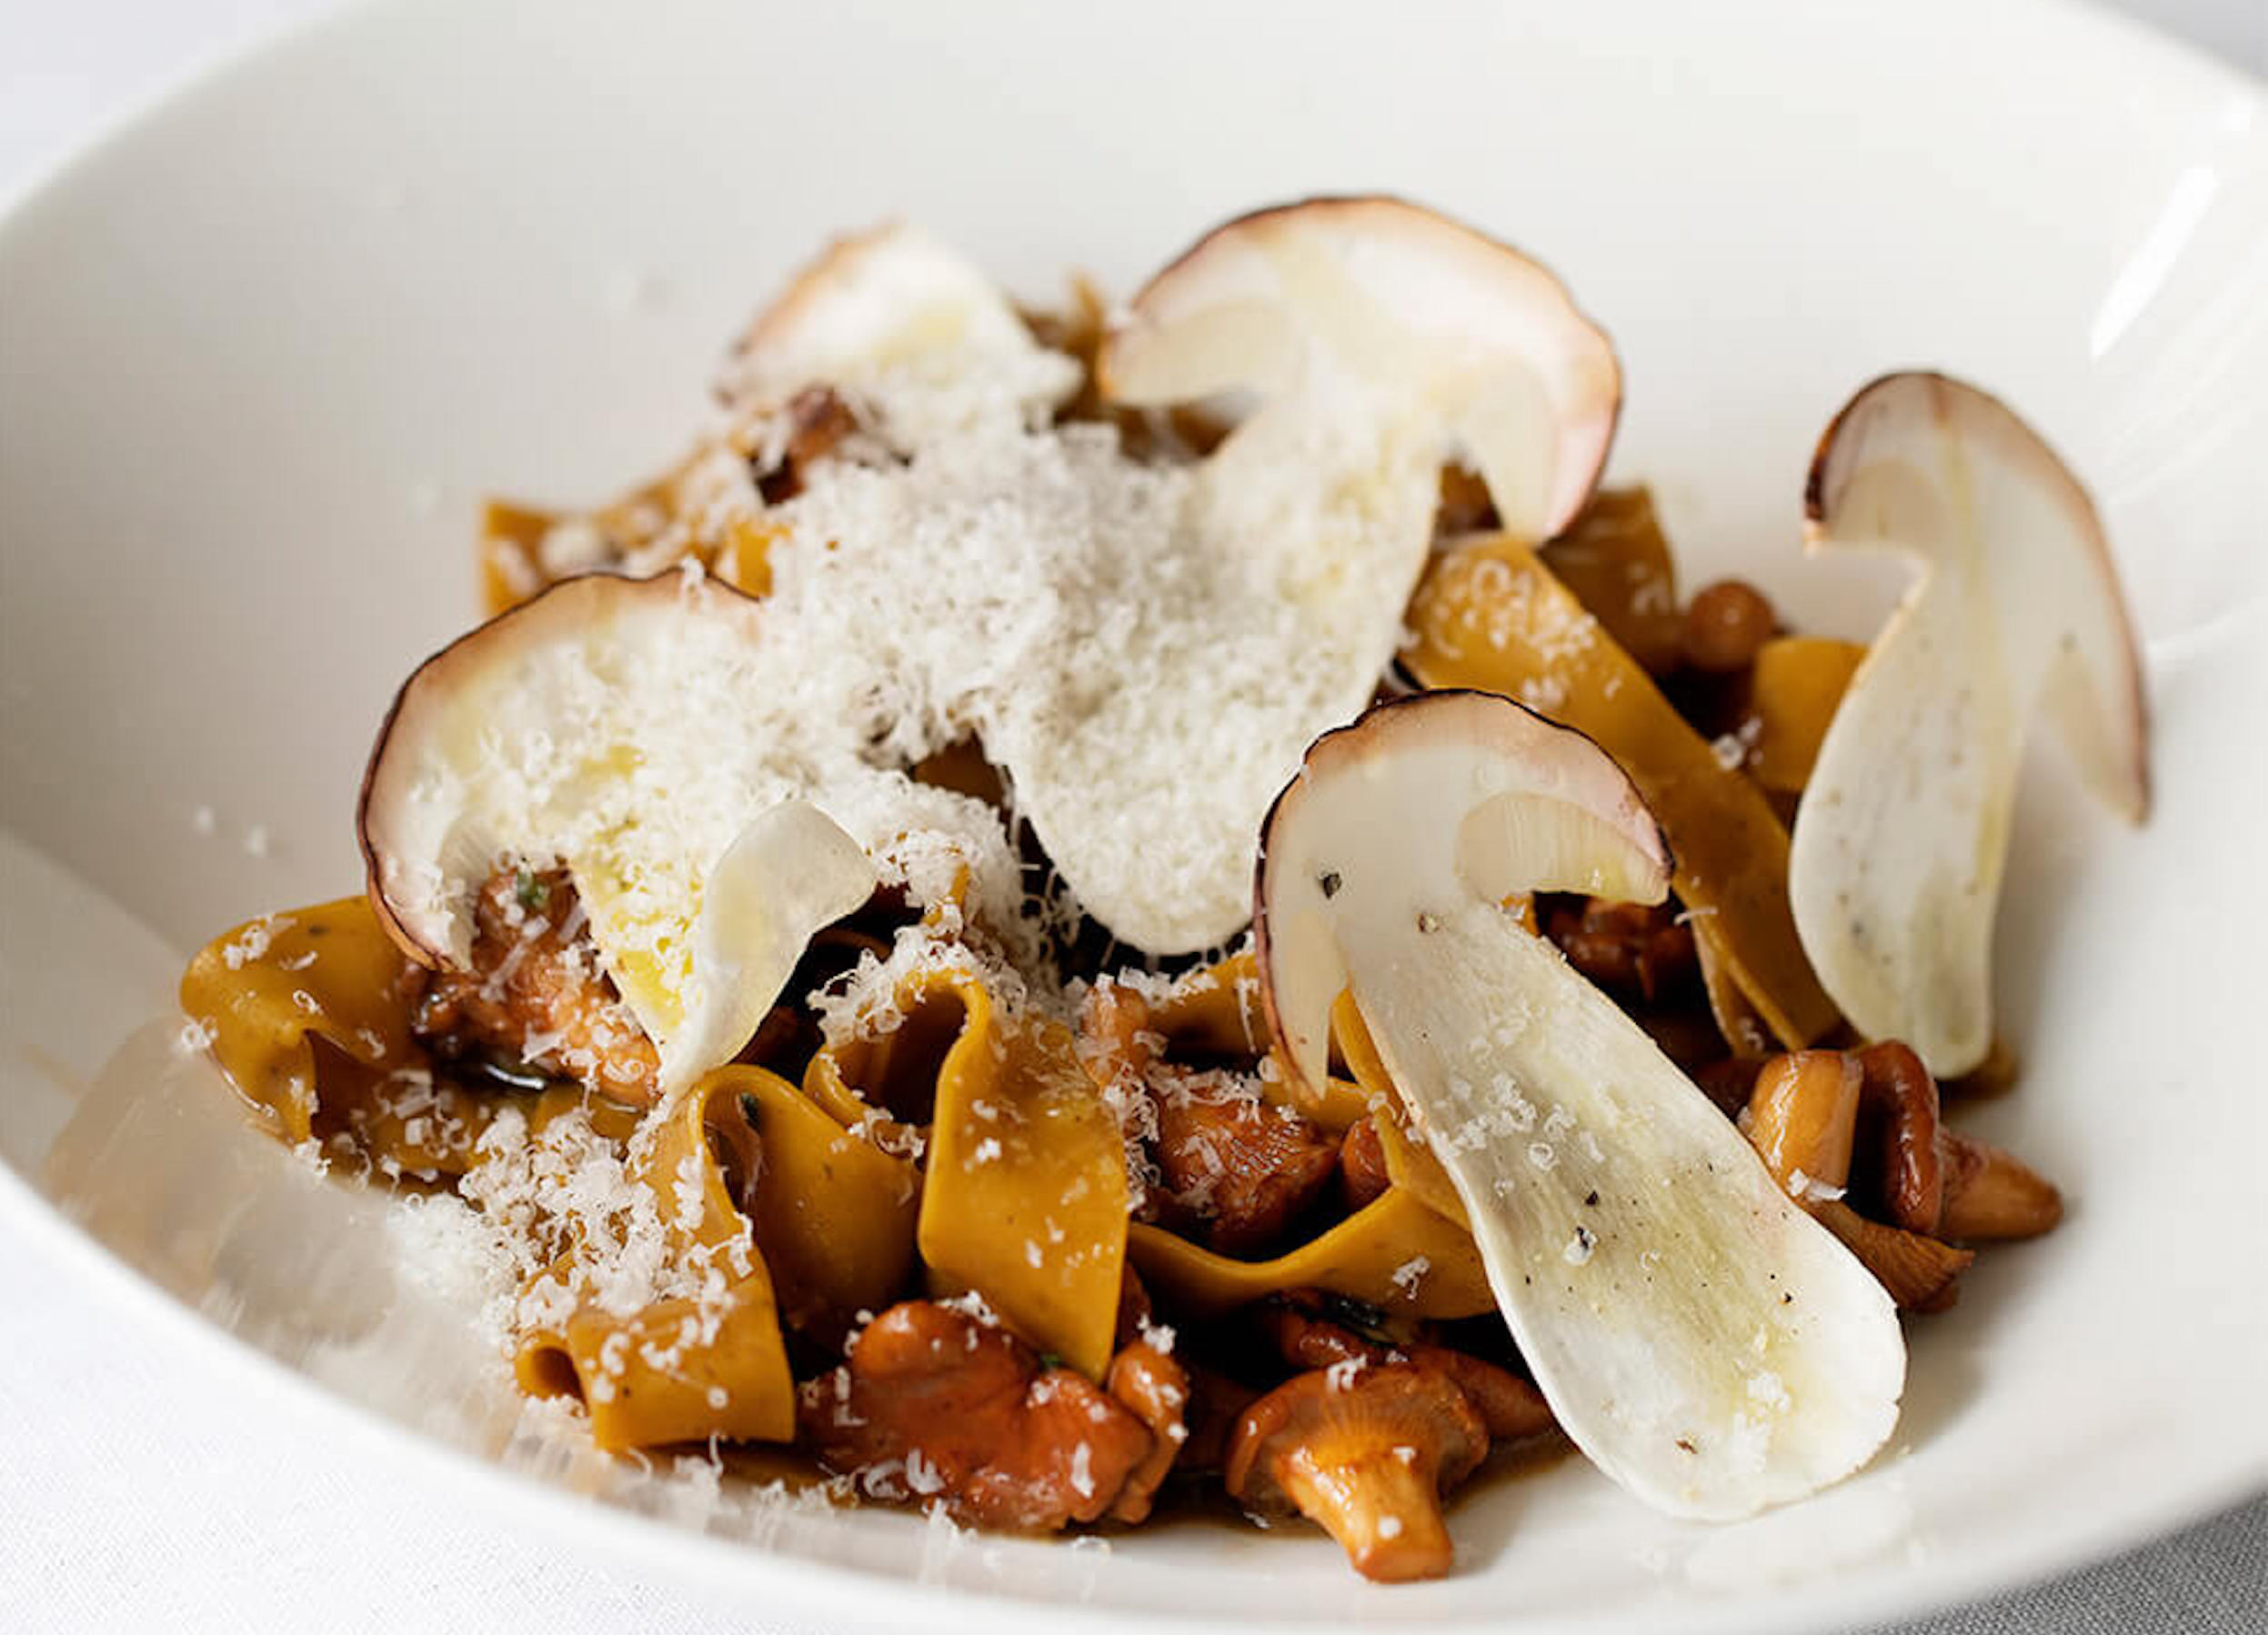 Wild mushrooms, including ceps and girolles, at Murano in Covent Garden